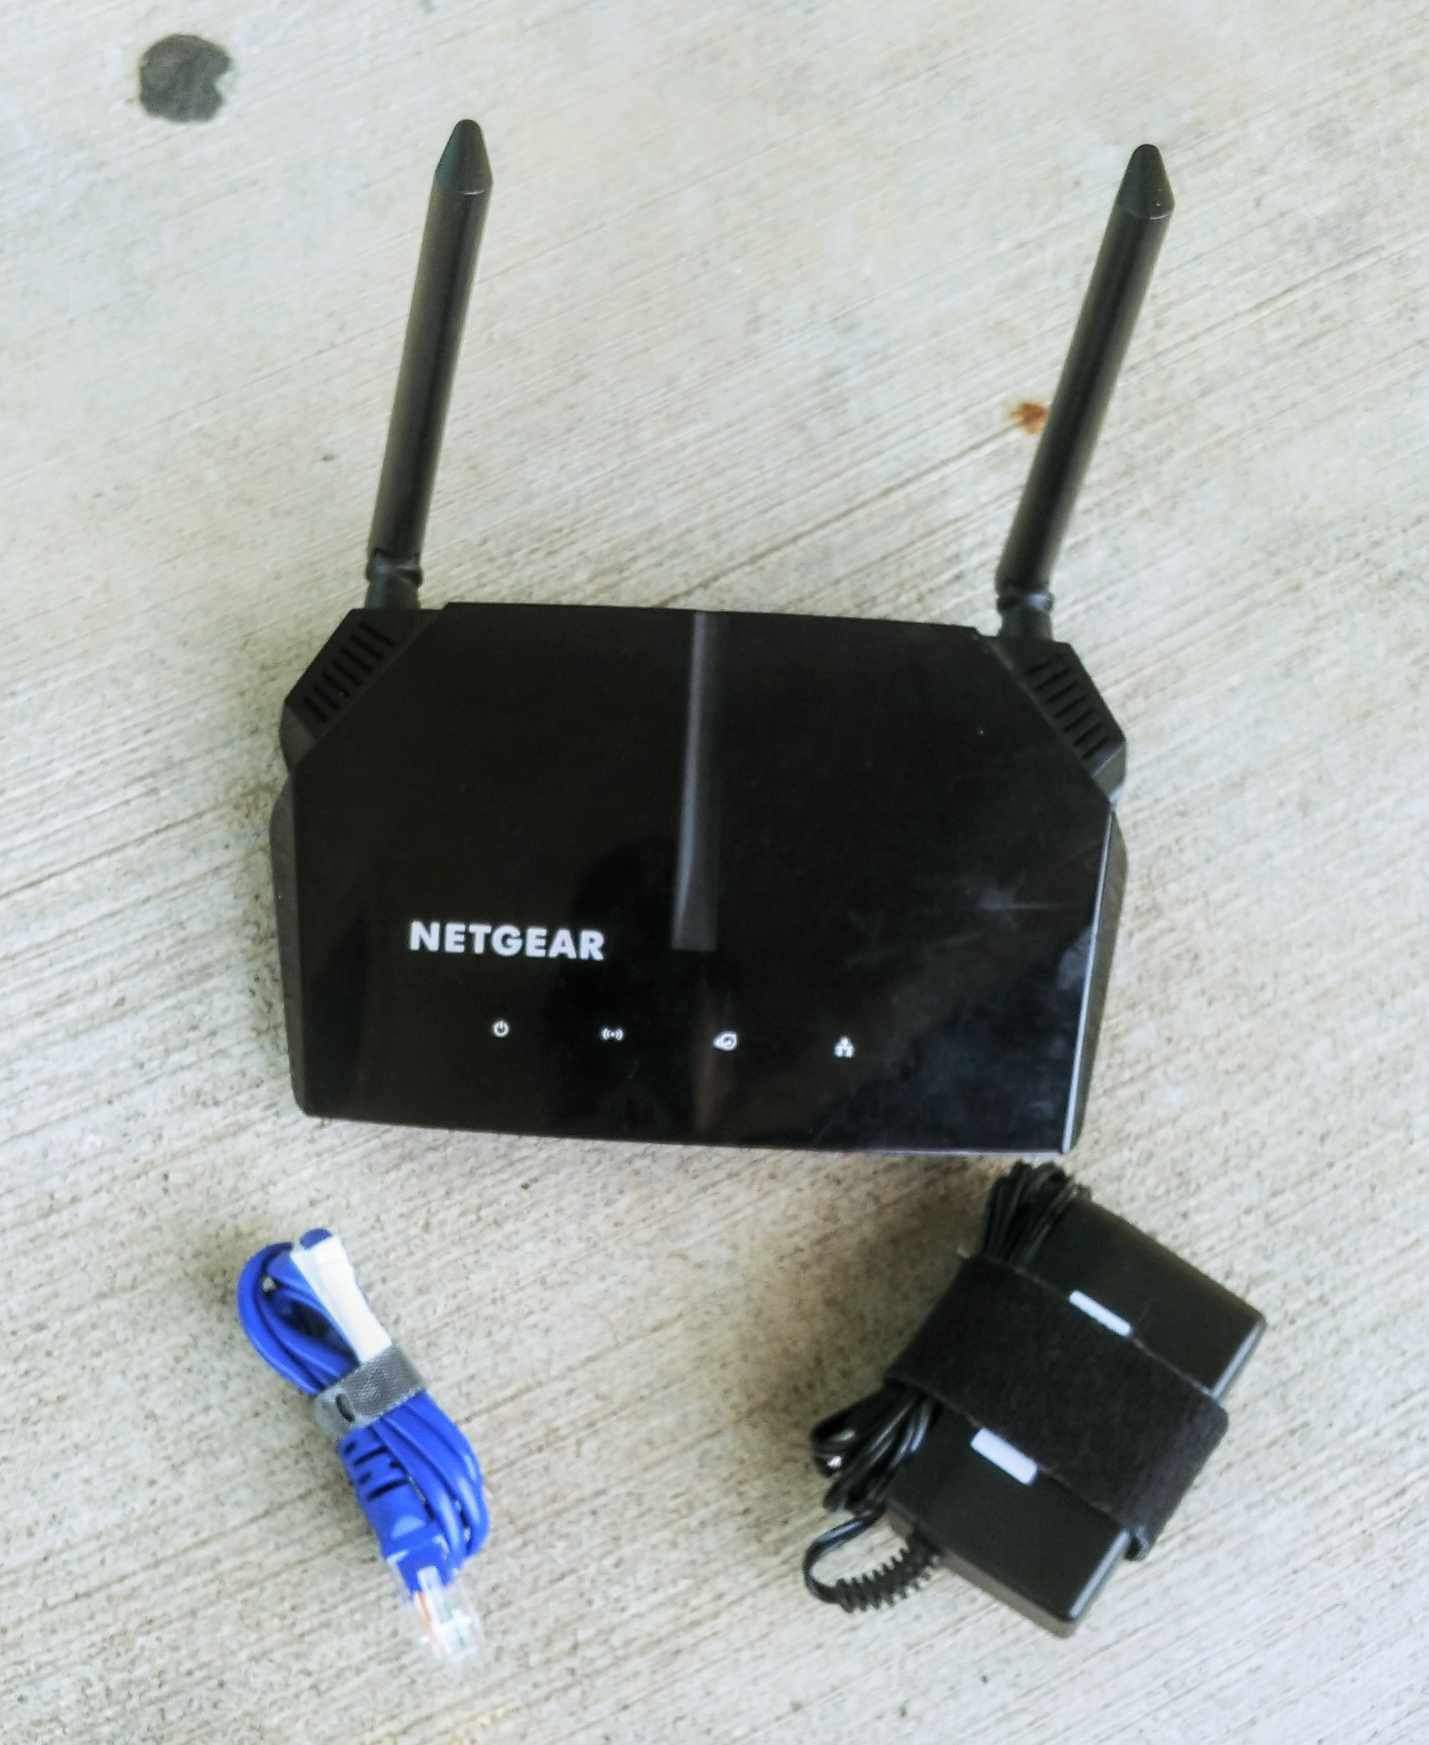 NETGEAR AC1200 Dual Band WiFi Router Model R6120 Pre-owned 